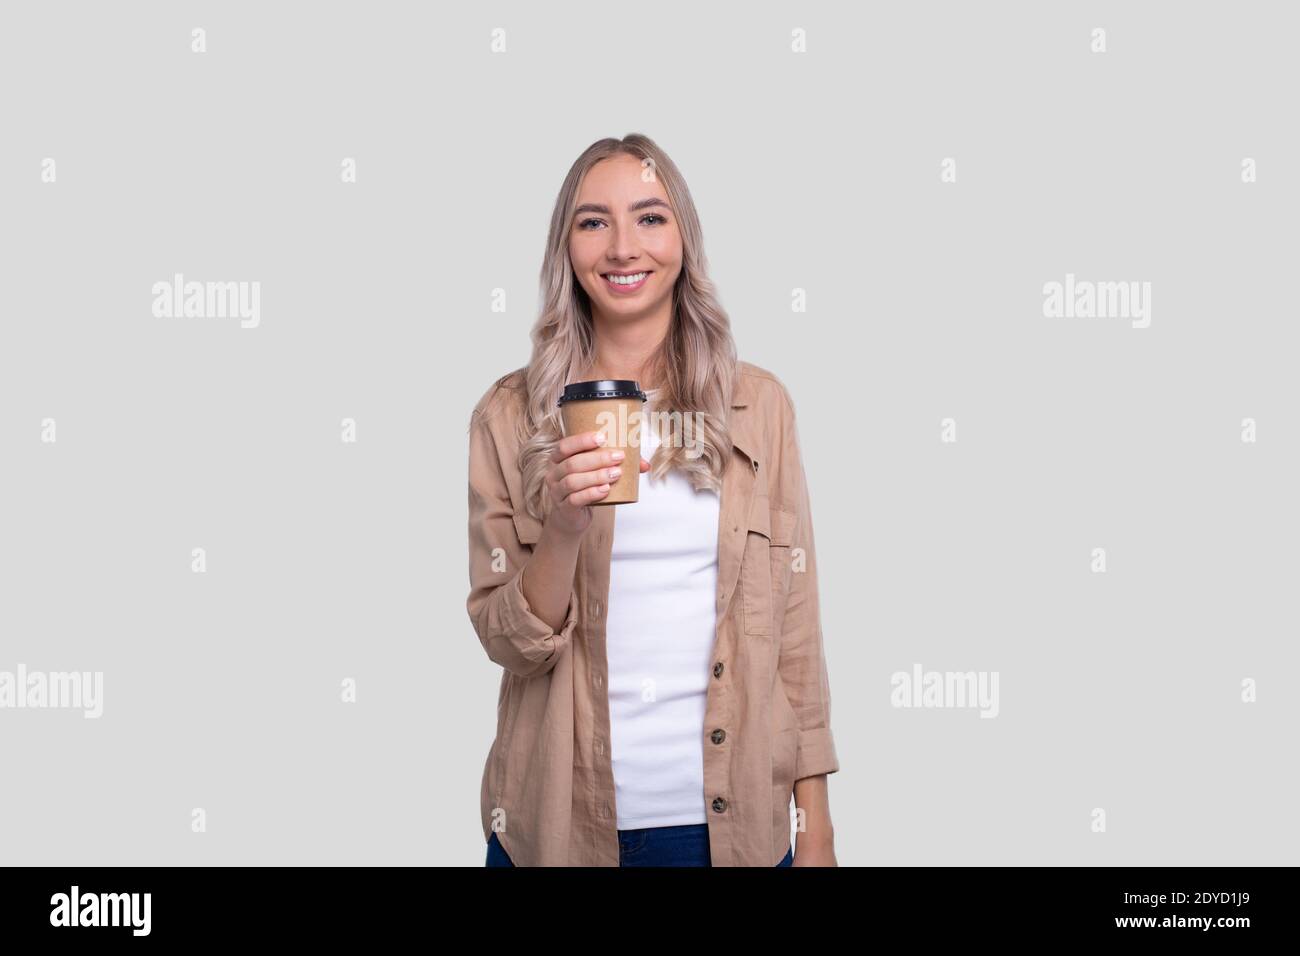 Girl Holding Take Away Coffee Cup. Girl With To Go Coffee Cup in Hands. Stock Photo